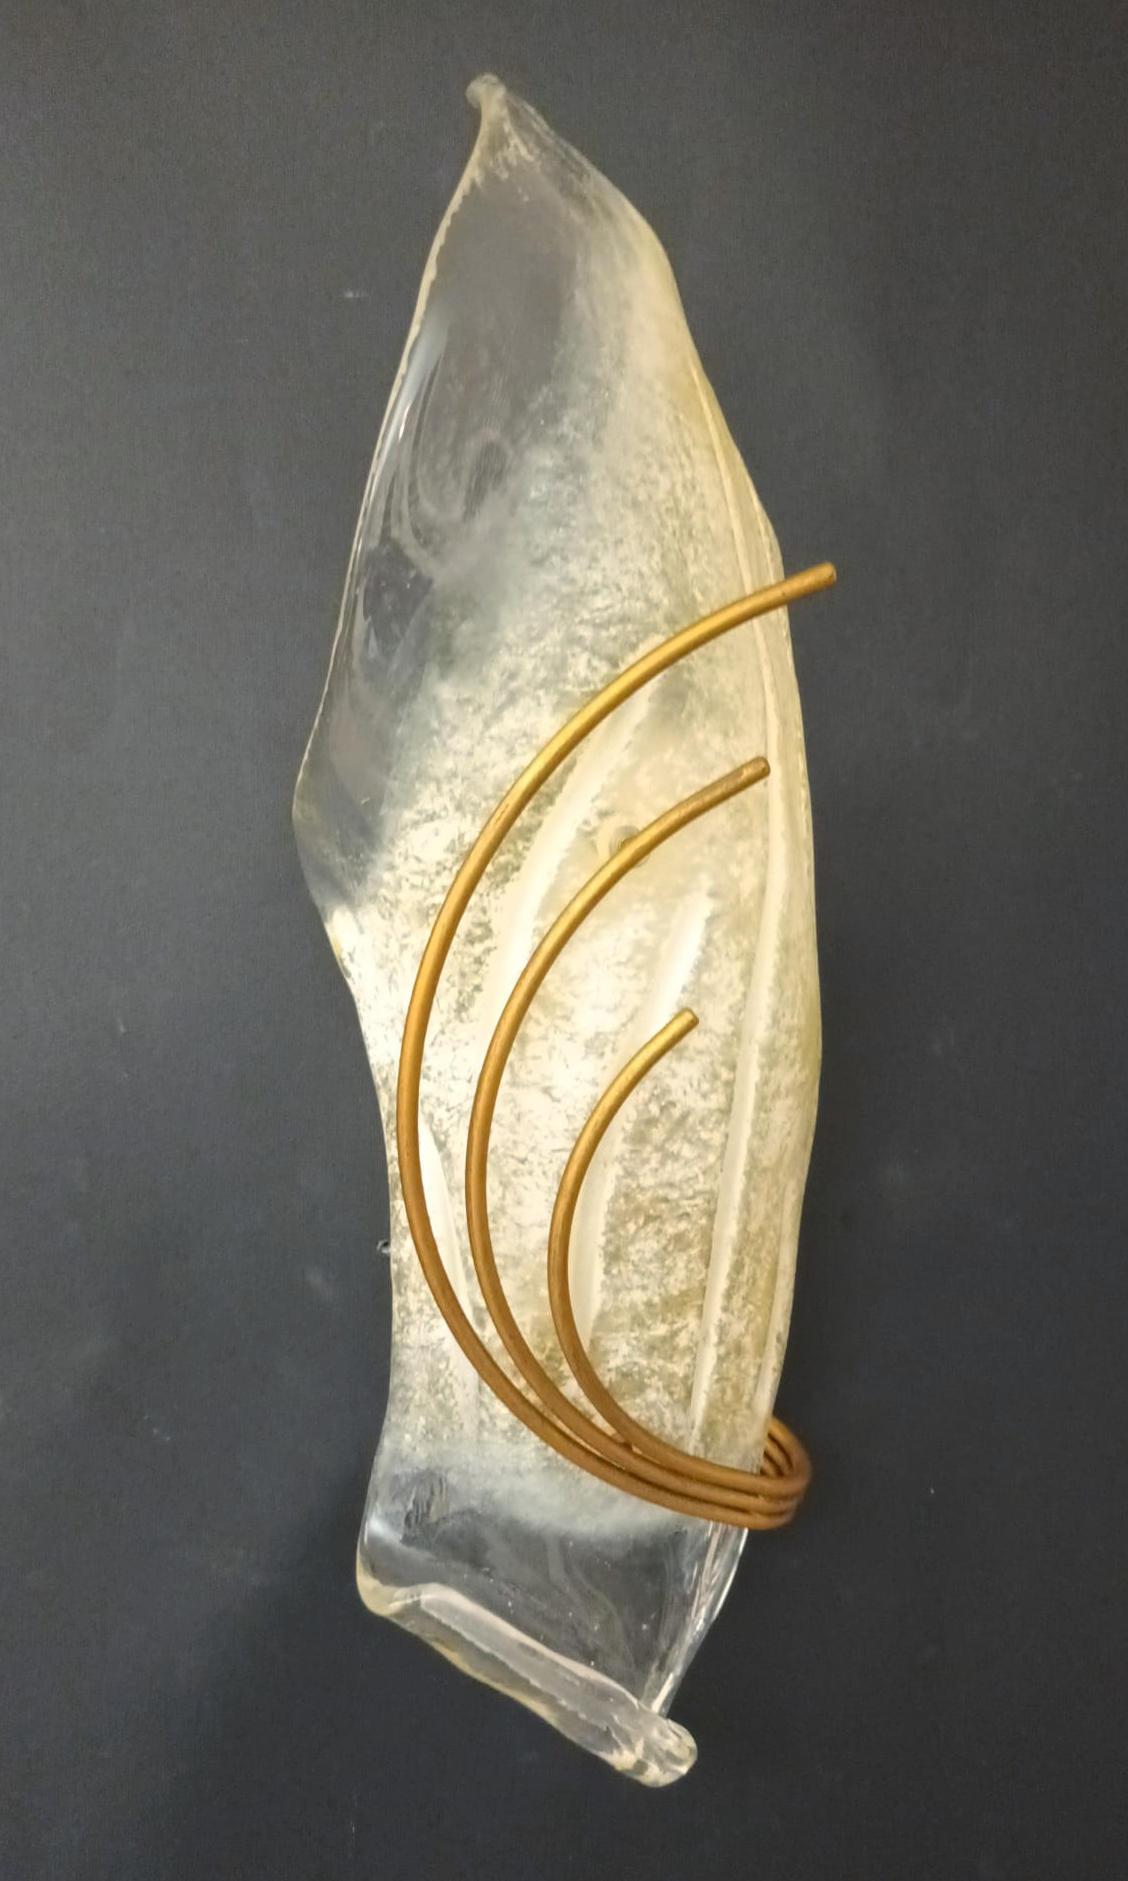 Vintage Italian Art Deco style wall lights with milky opaline Murano glass leaf shades mounted on brass brackets / Made in Italy, circa 1960s
Measures: height 18 inches, width 6 inches, depth 5 inches
1 light / E12 or E14 type / max 40W
1 pair